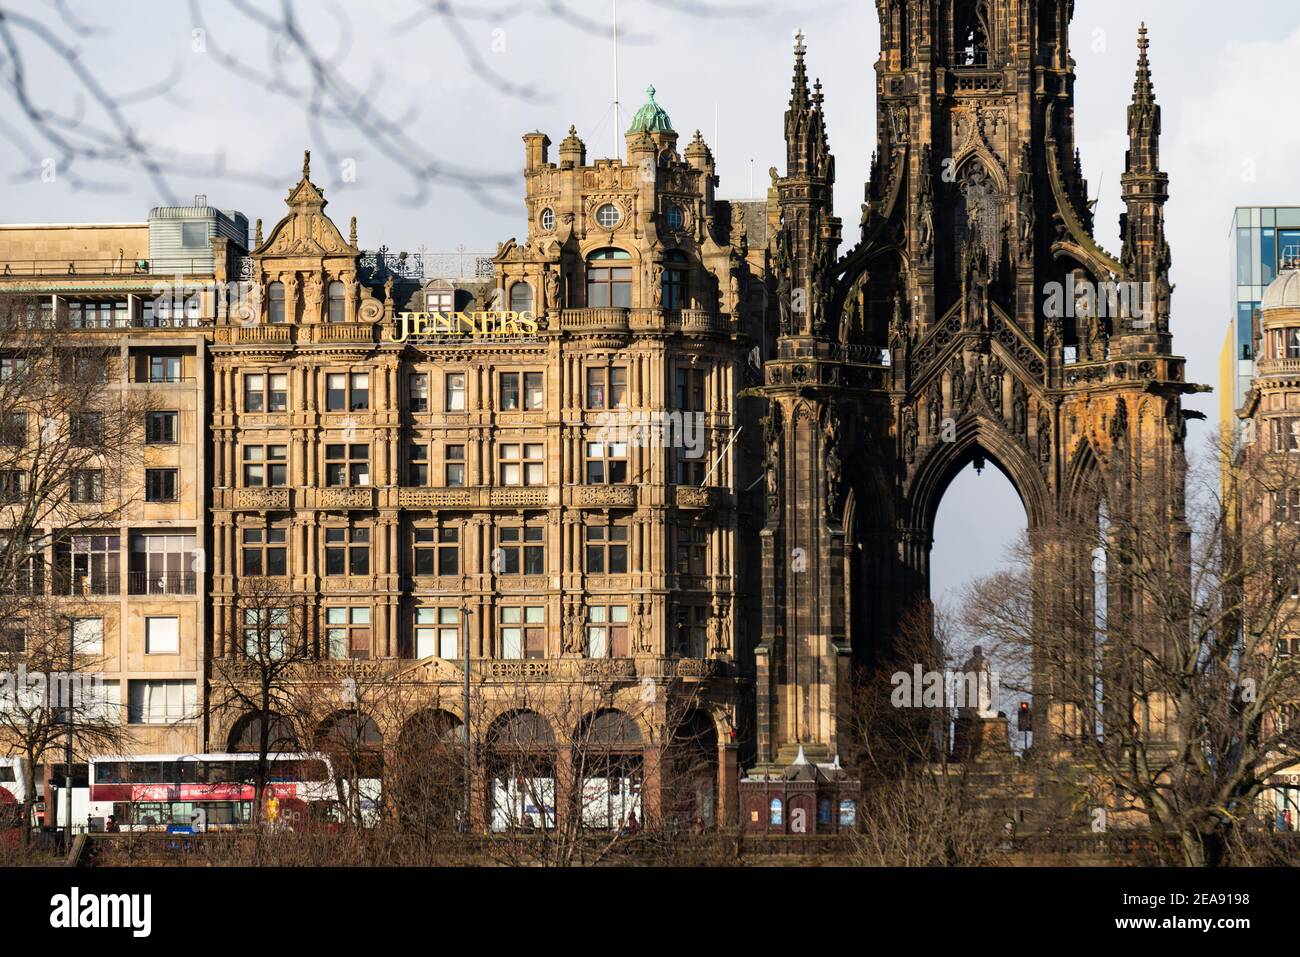 View of Jenners department store on Princes Street Edinburgh. The store will close permanently in 2021. Scotland, UK Stock Photo